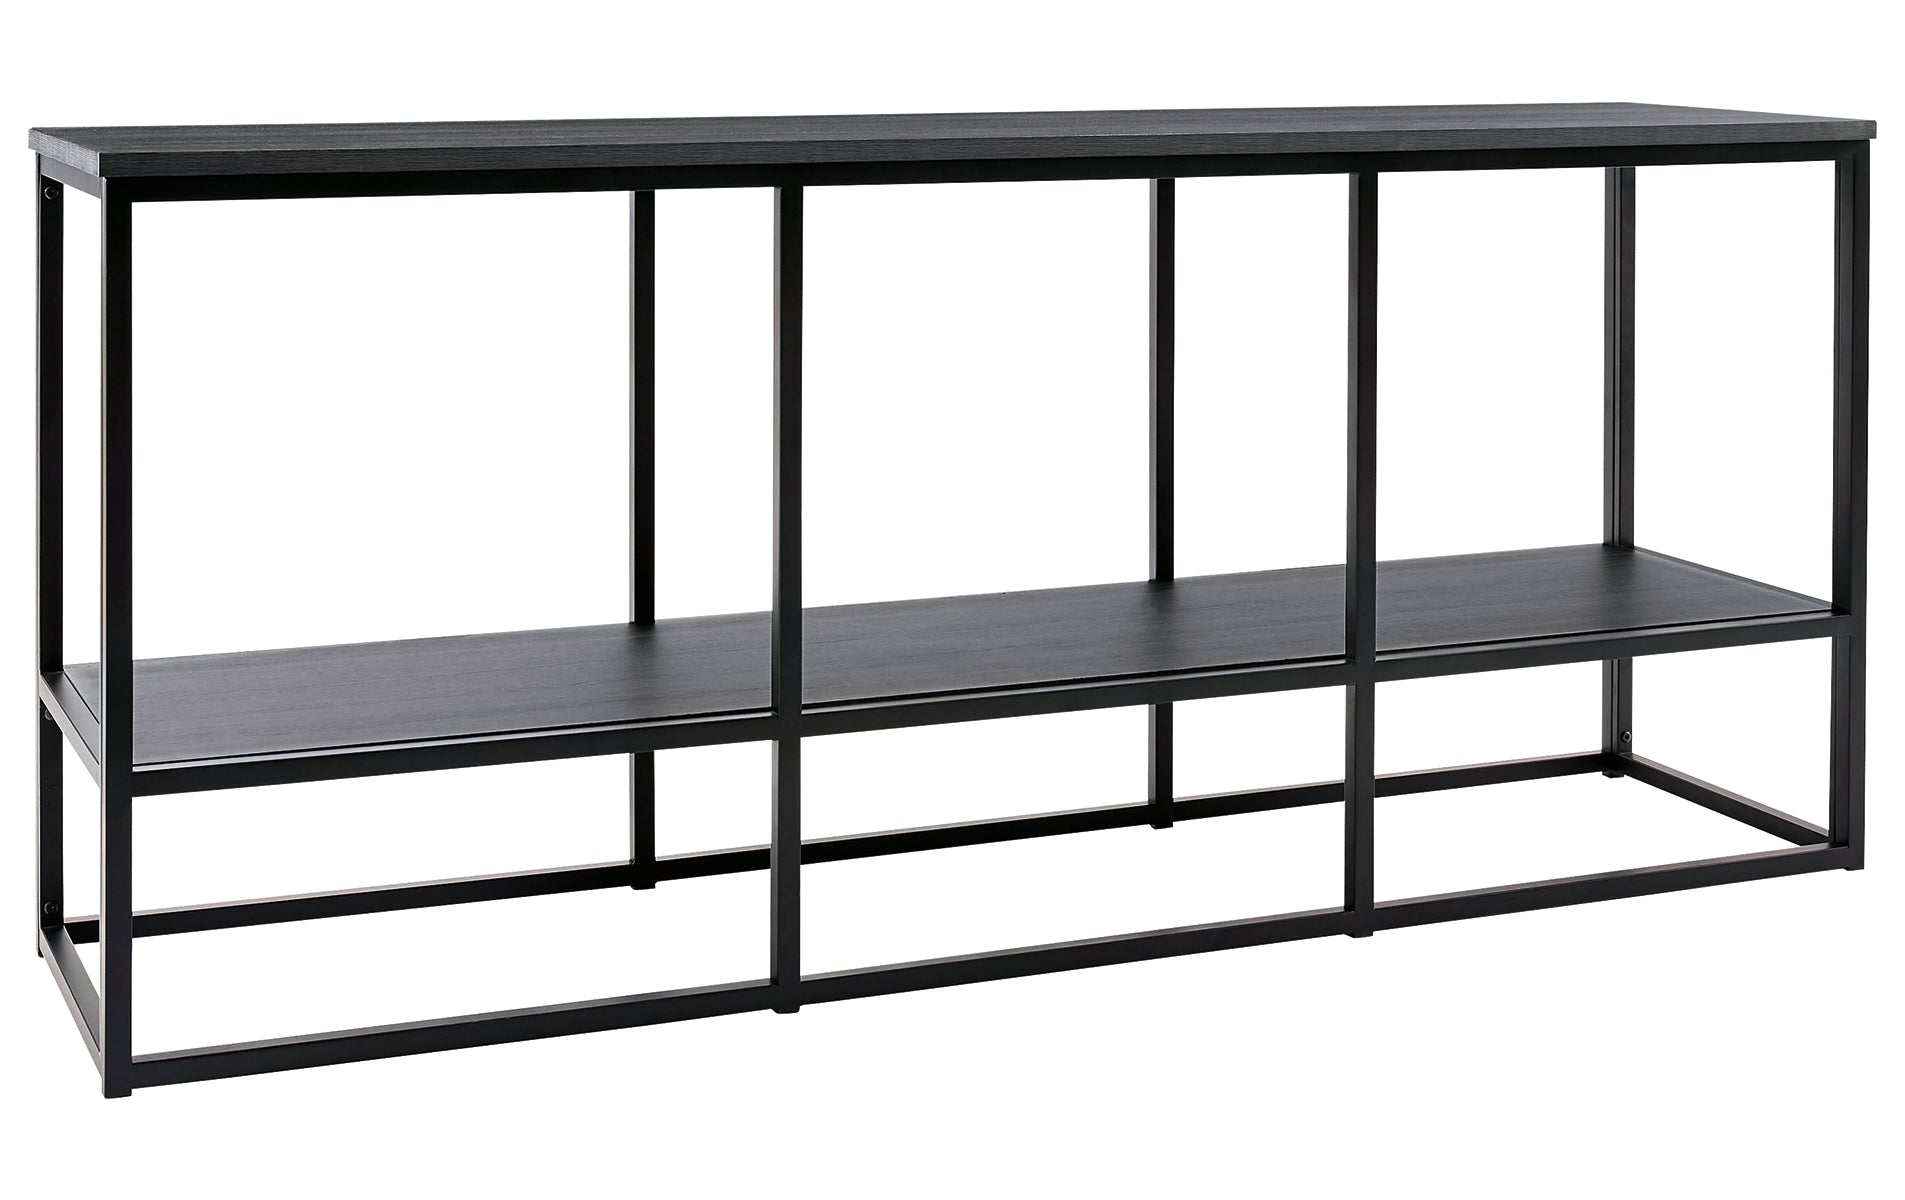 Yarlow 65" TV Stand